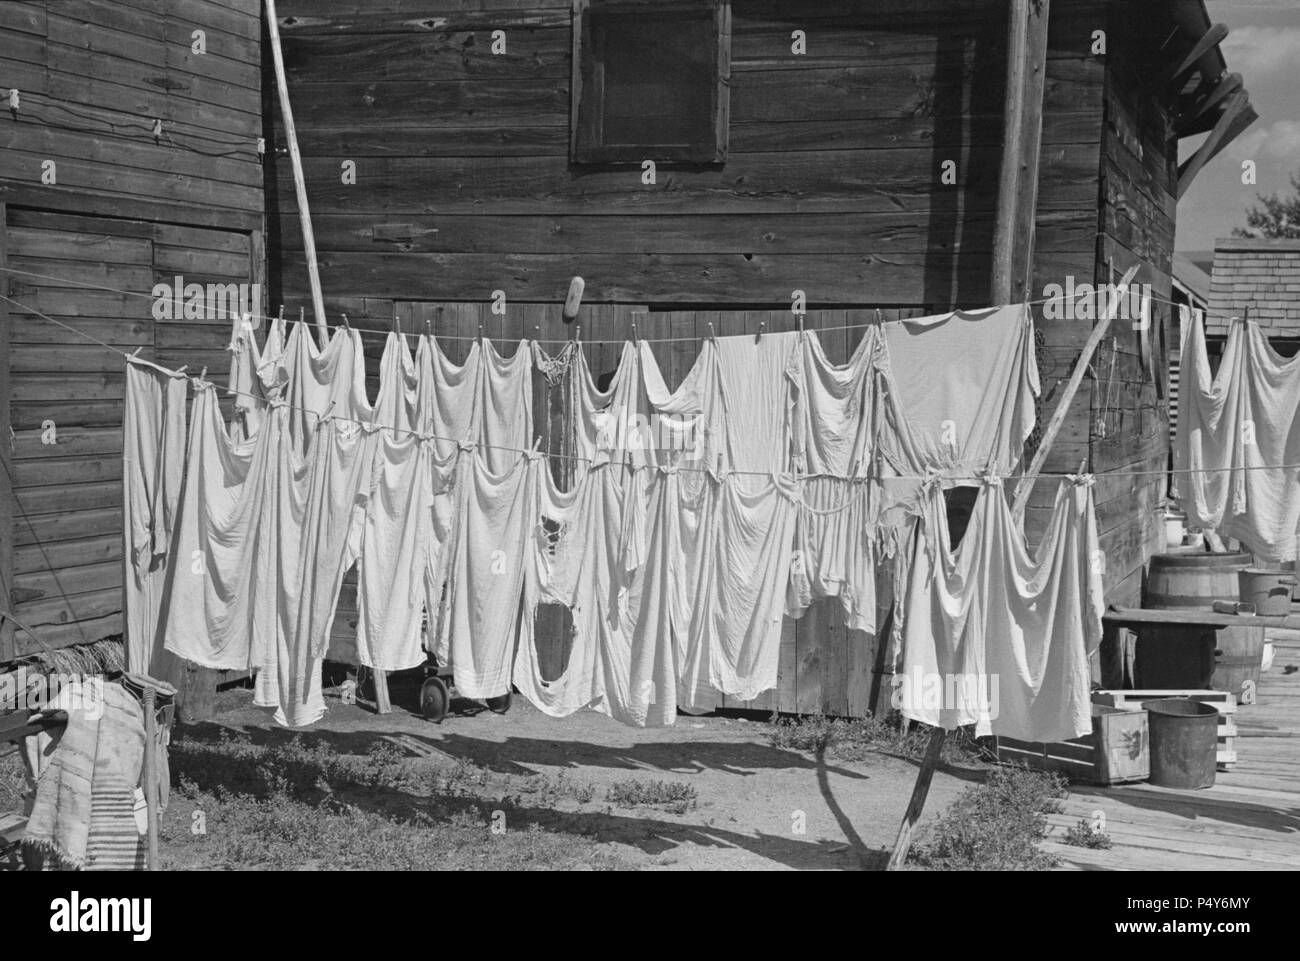 Clothesline, Winton, Minnesota, USA, Russell Lee, U.S. Resettlement Administration, August 1937 Stock Photo